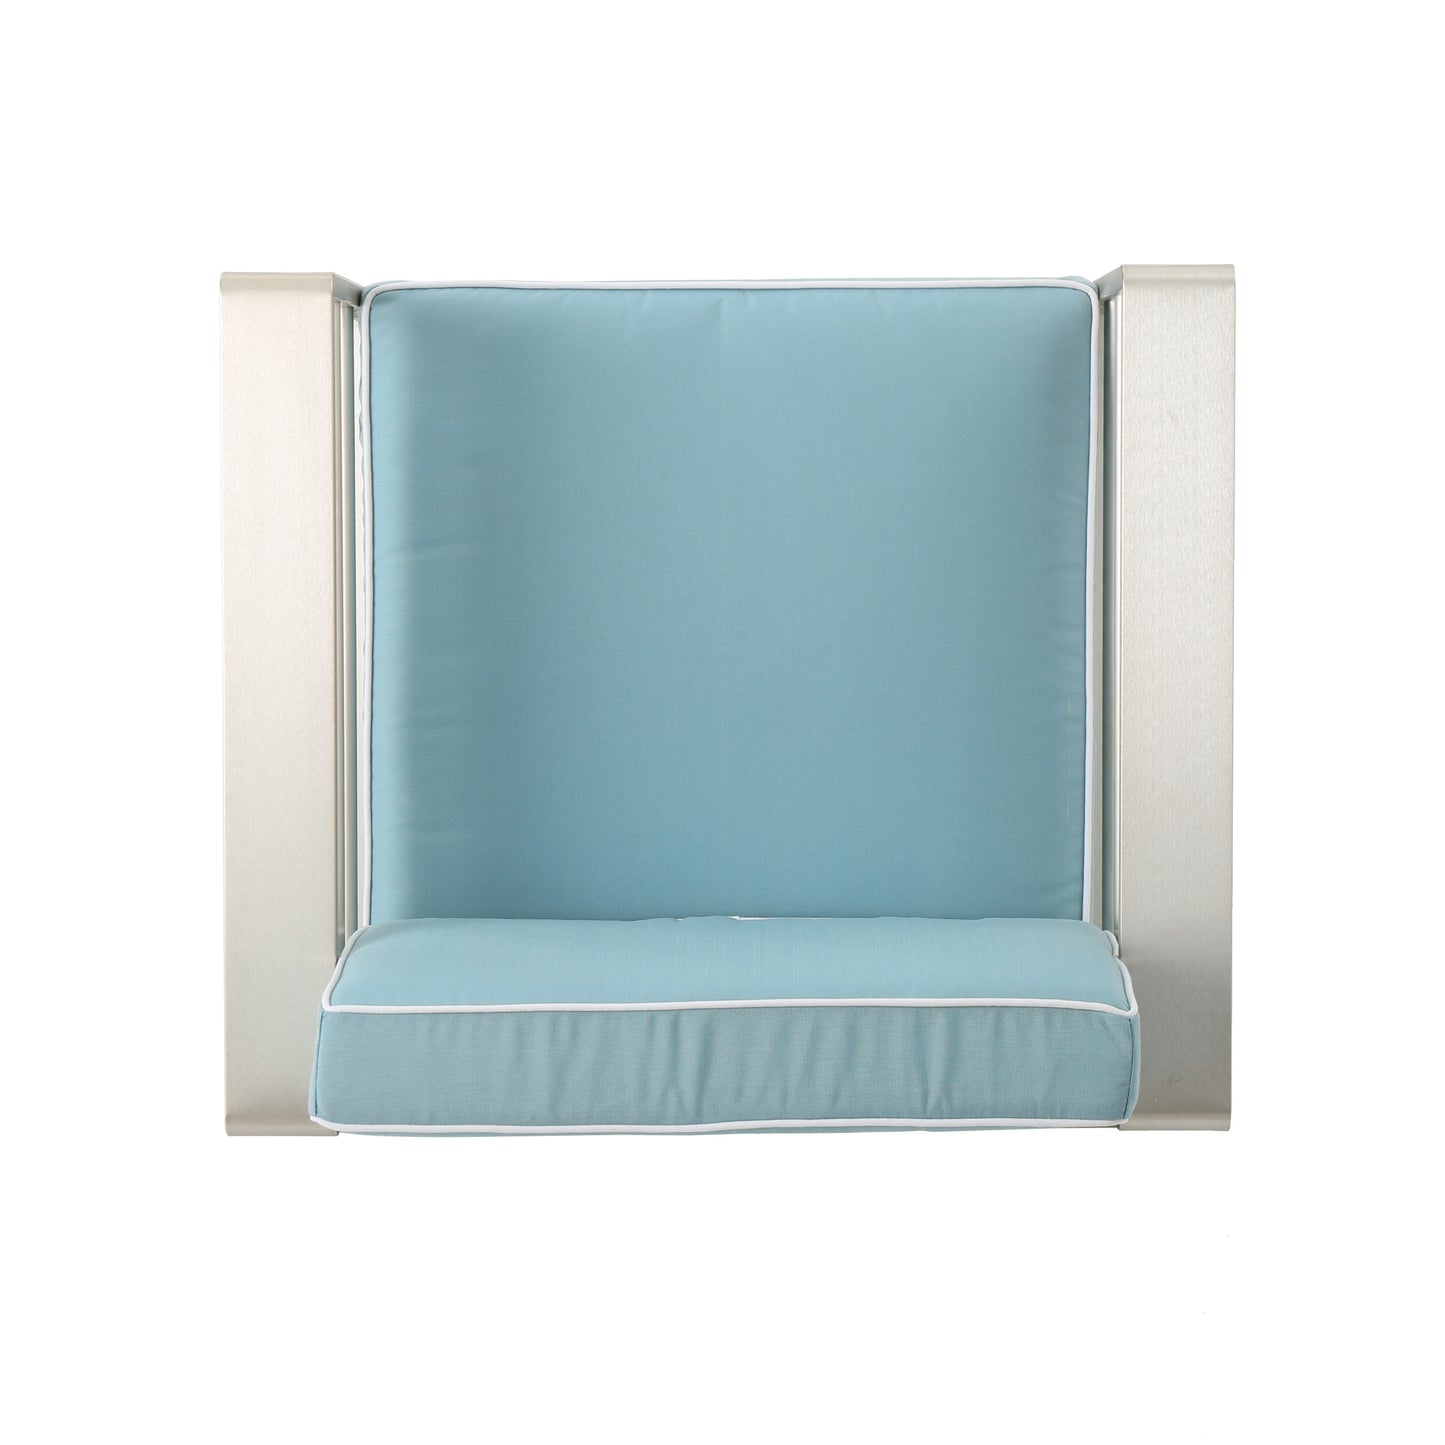 Crested Bay Outdoor Silver Aluminum Frame Light Teal Cushion Club Chairs